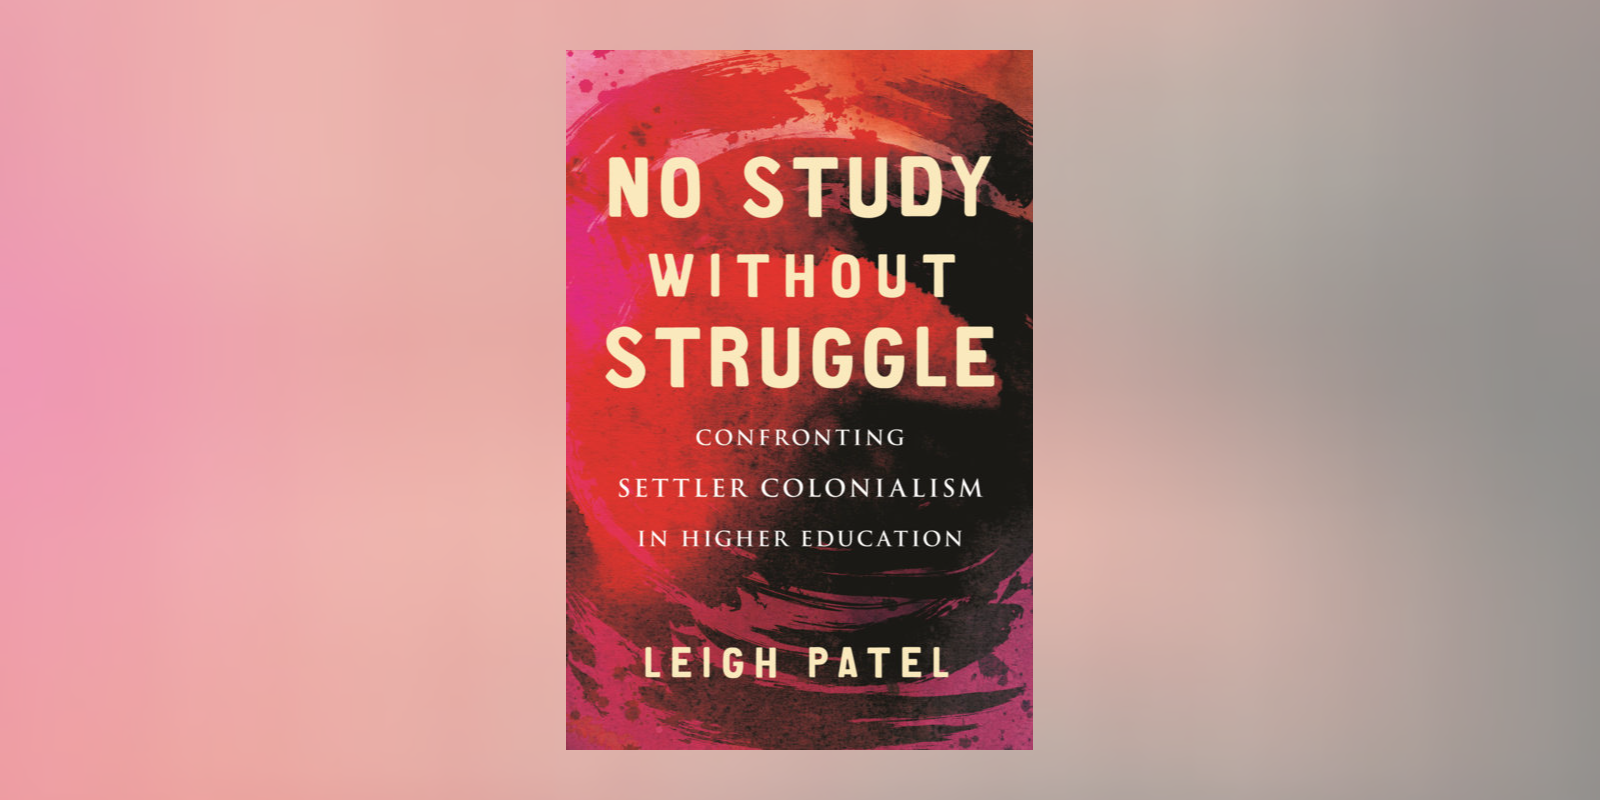 Higher Education Must Be Decolonized Through Study and Struggle: A Q&A With Leigh Patel, author of <i>No Study Without Struggle</i>